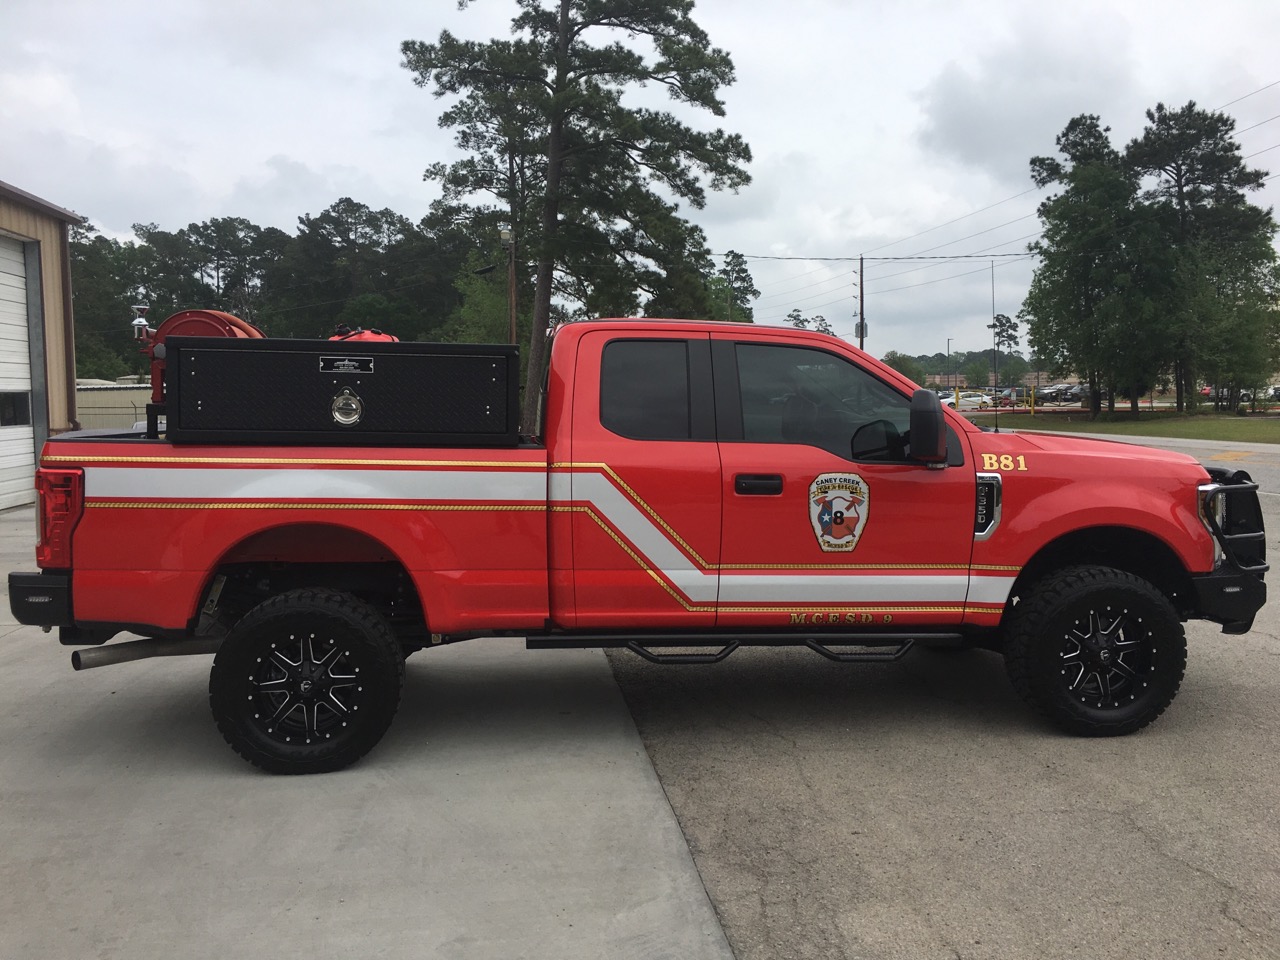 Caney Creek Fire Department